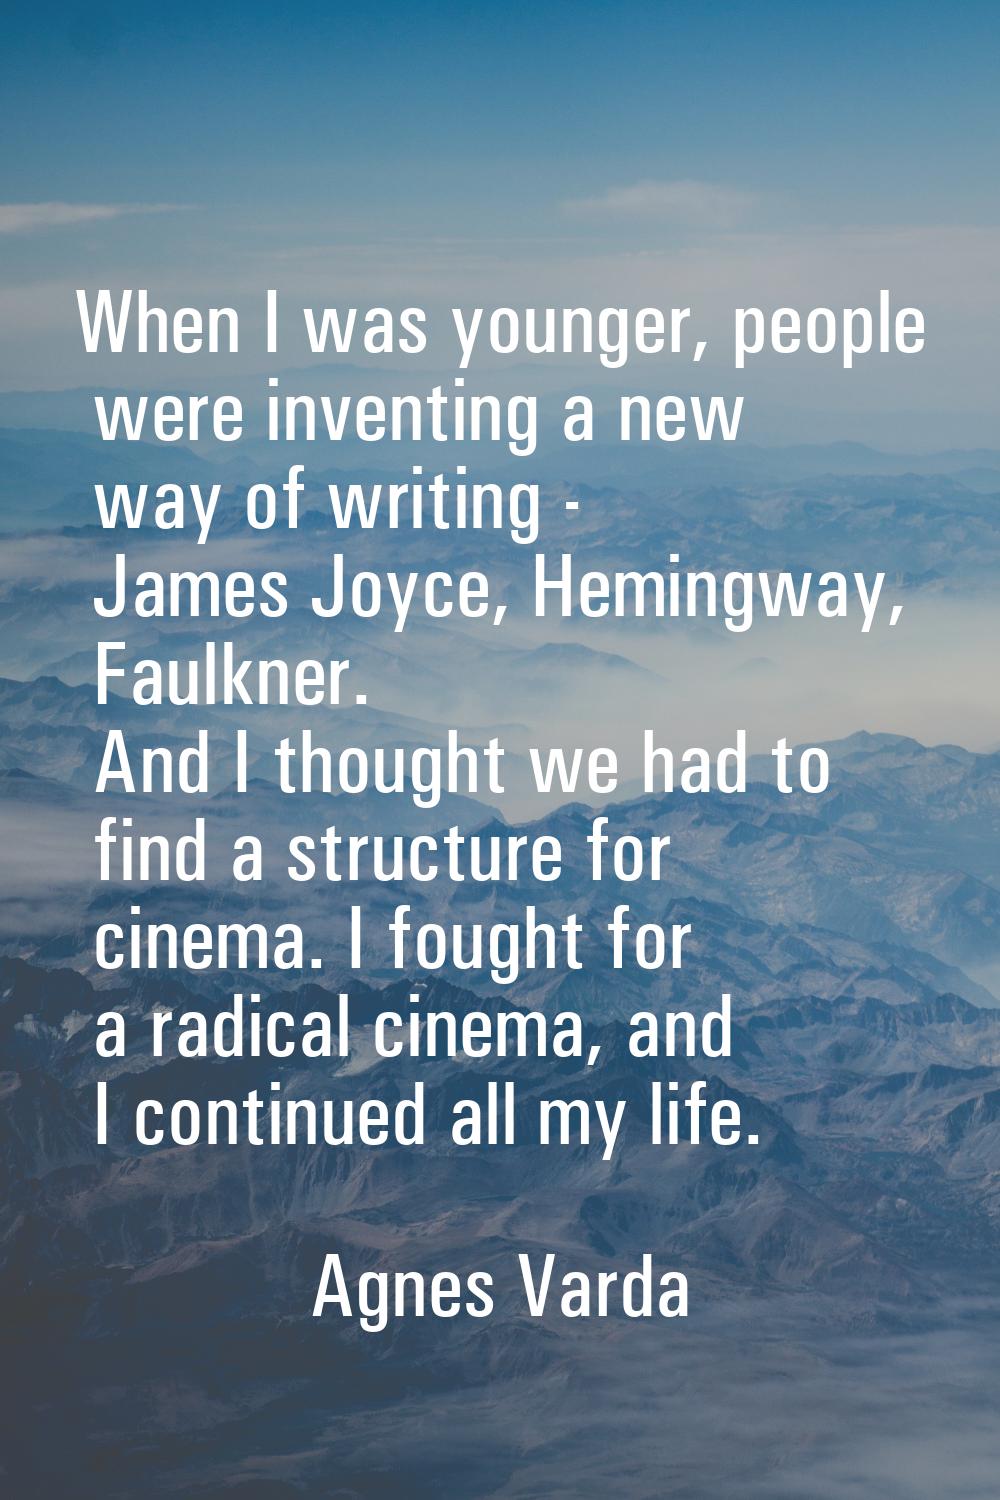 When I was younger, people were inventing a new way of writing - James Joyce, Hemingway, Faulkner. 